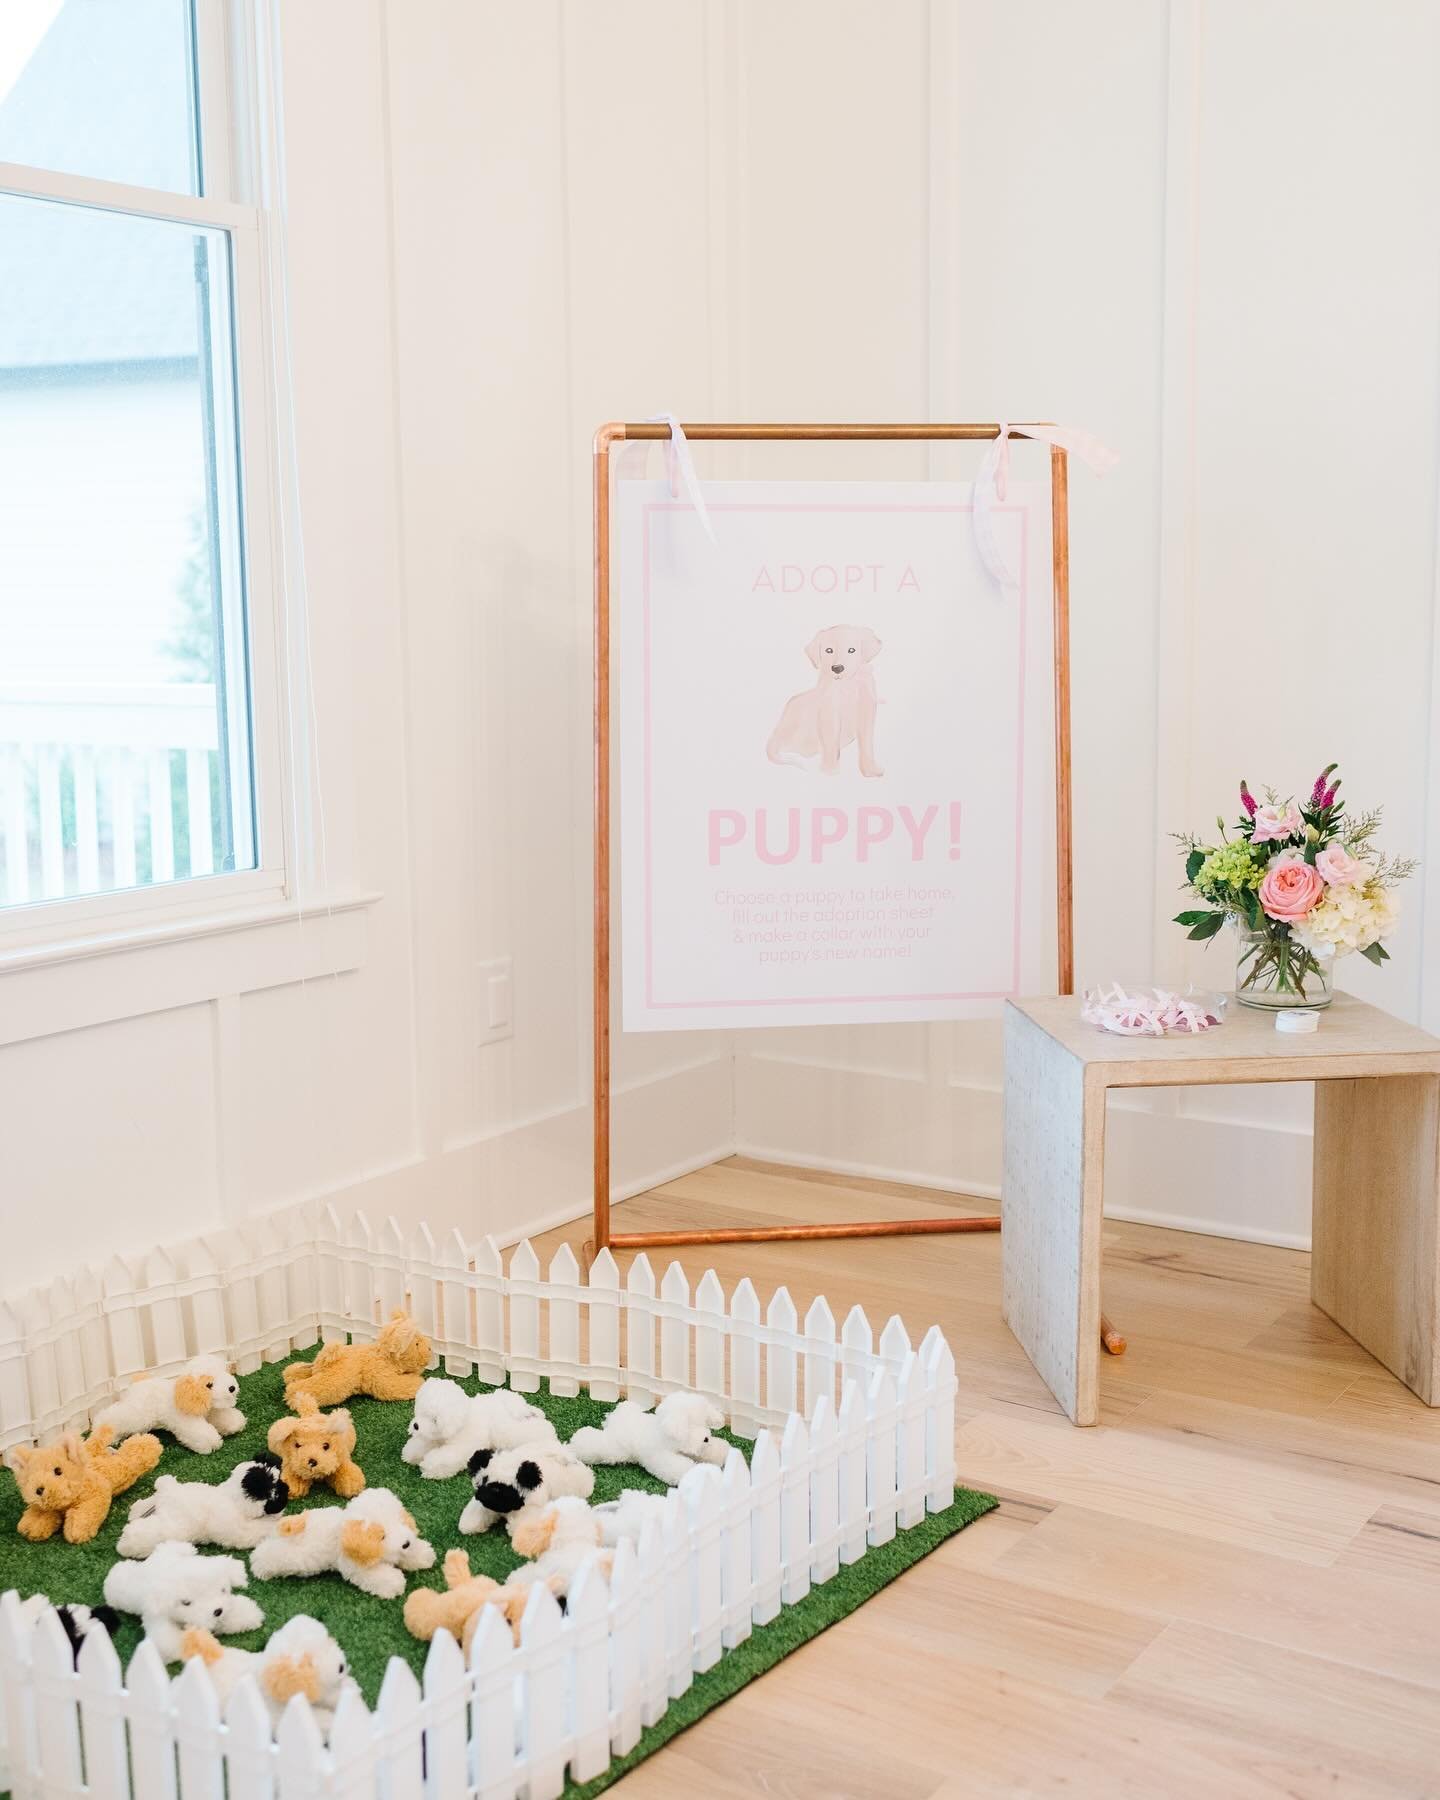 The details of this puppy pawty were the cutest 🐶!!! We loved designing the signage, tablescapes, backdrops &amp; more! 

Photos by @erinreid_photography 

#puppyparty #partyideas #partyinspo #atlballoons #balloonsandbackdrops #backdrop #photoop #tw